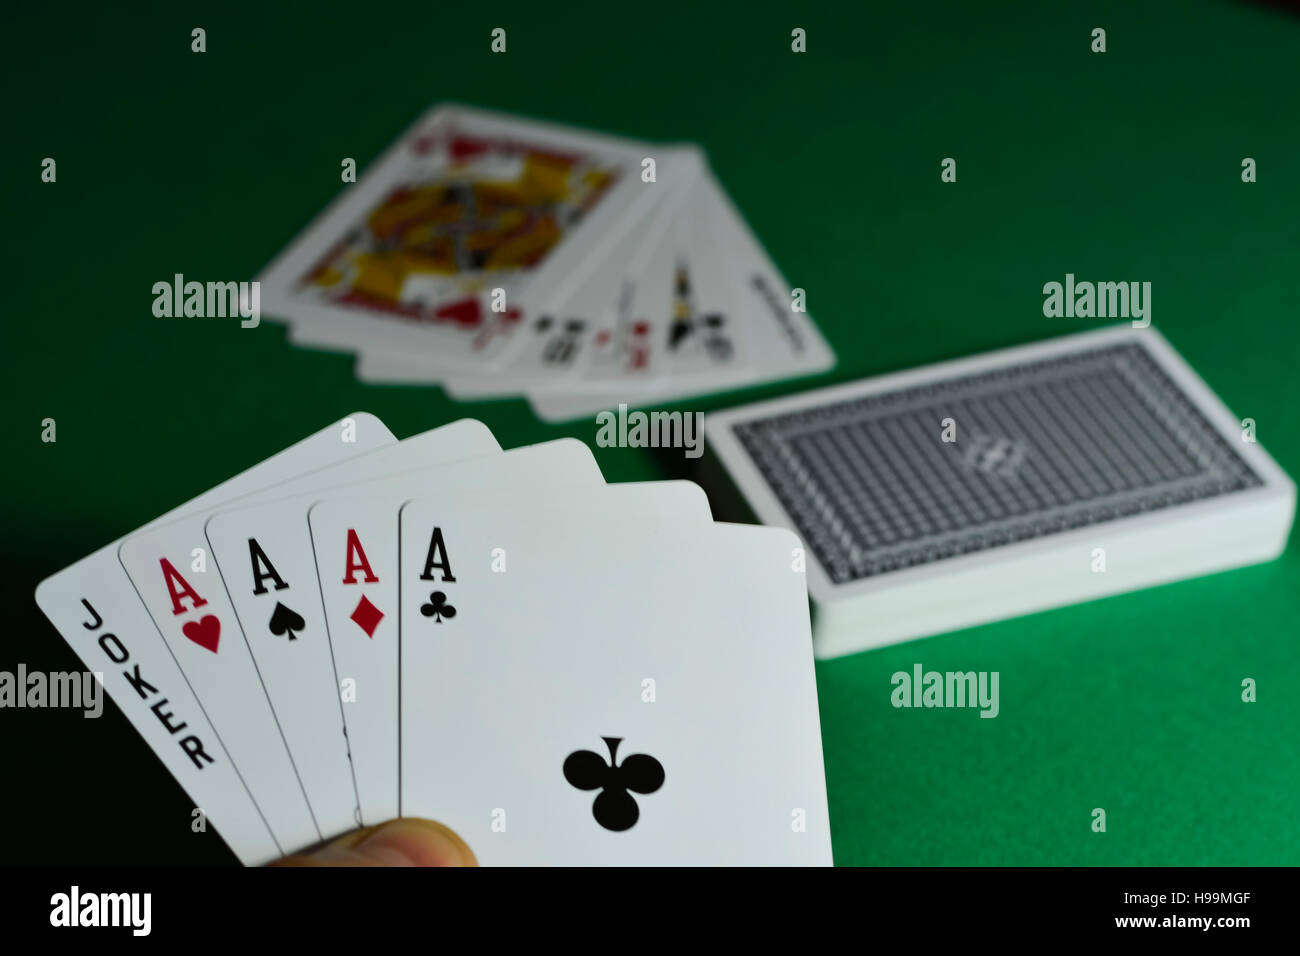 ace, poker, card, game Stock Photo